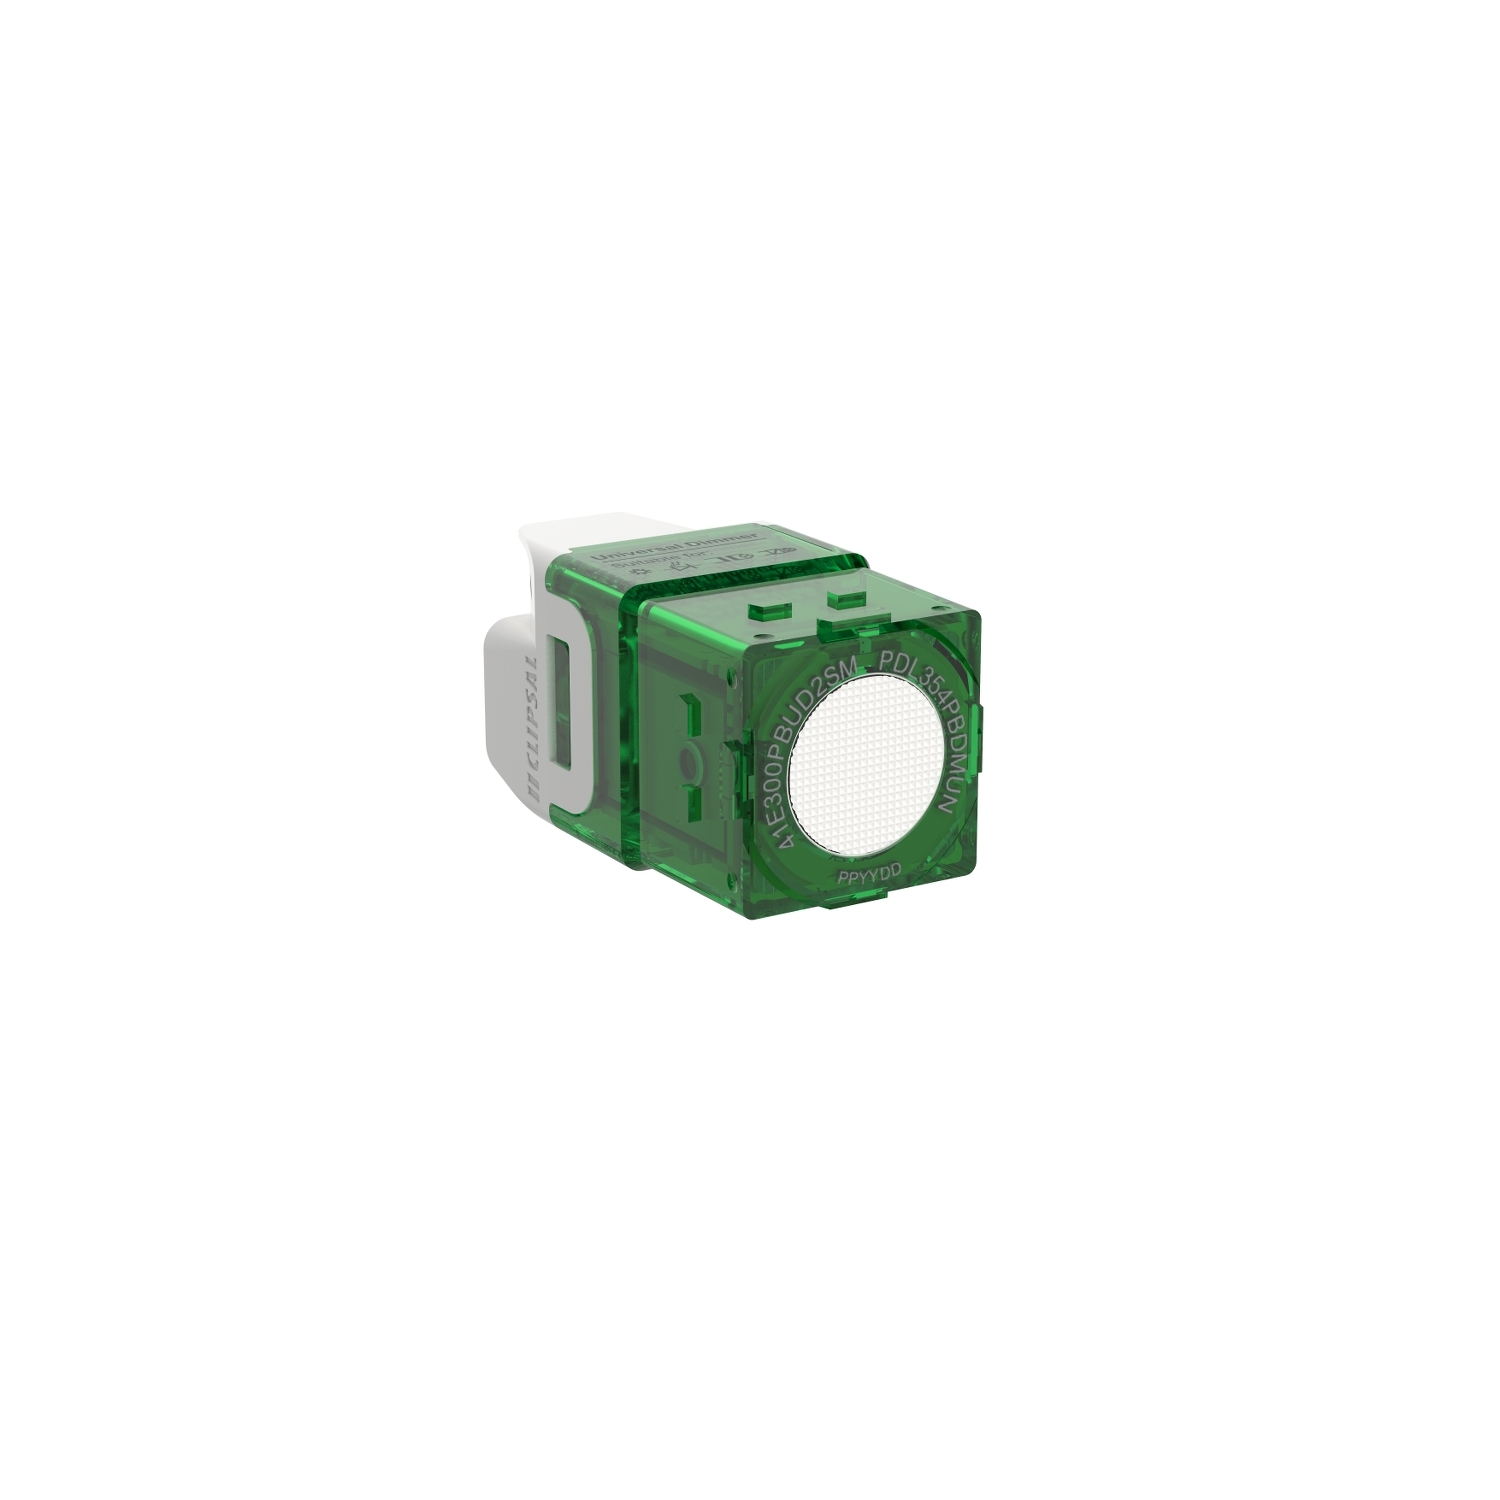 PDL 300 Series - Module Universal LED Dimmer PushButton 300W ControlLink